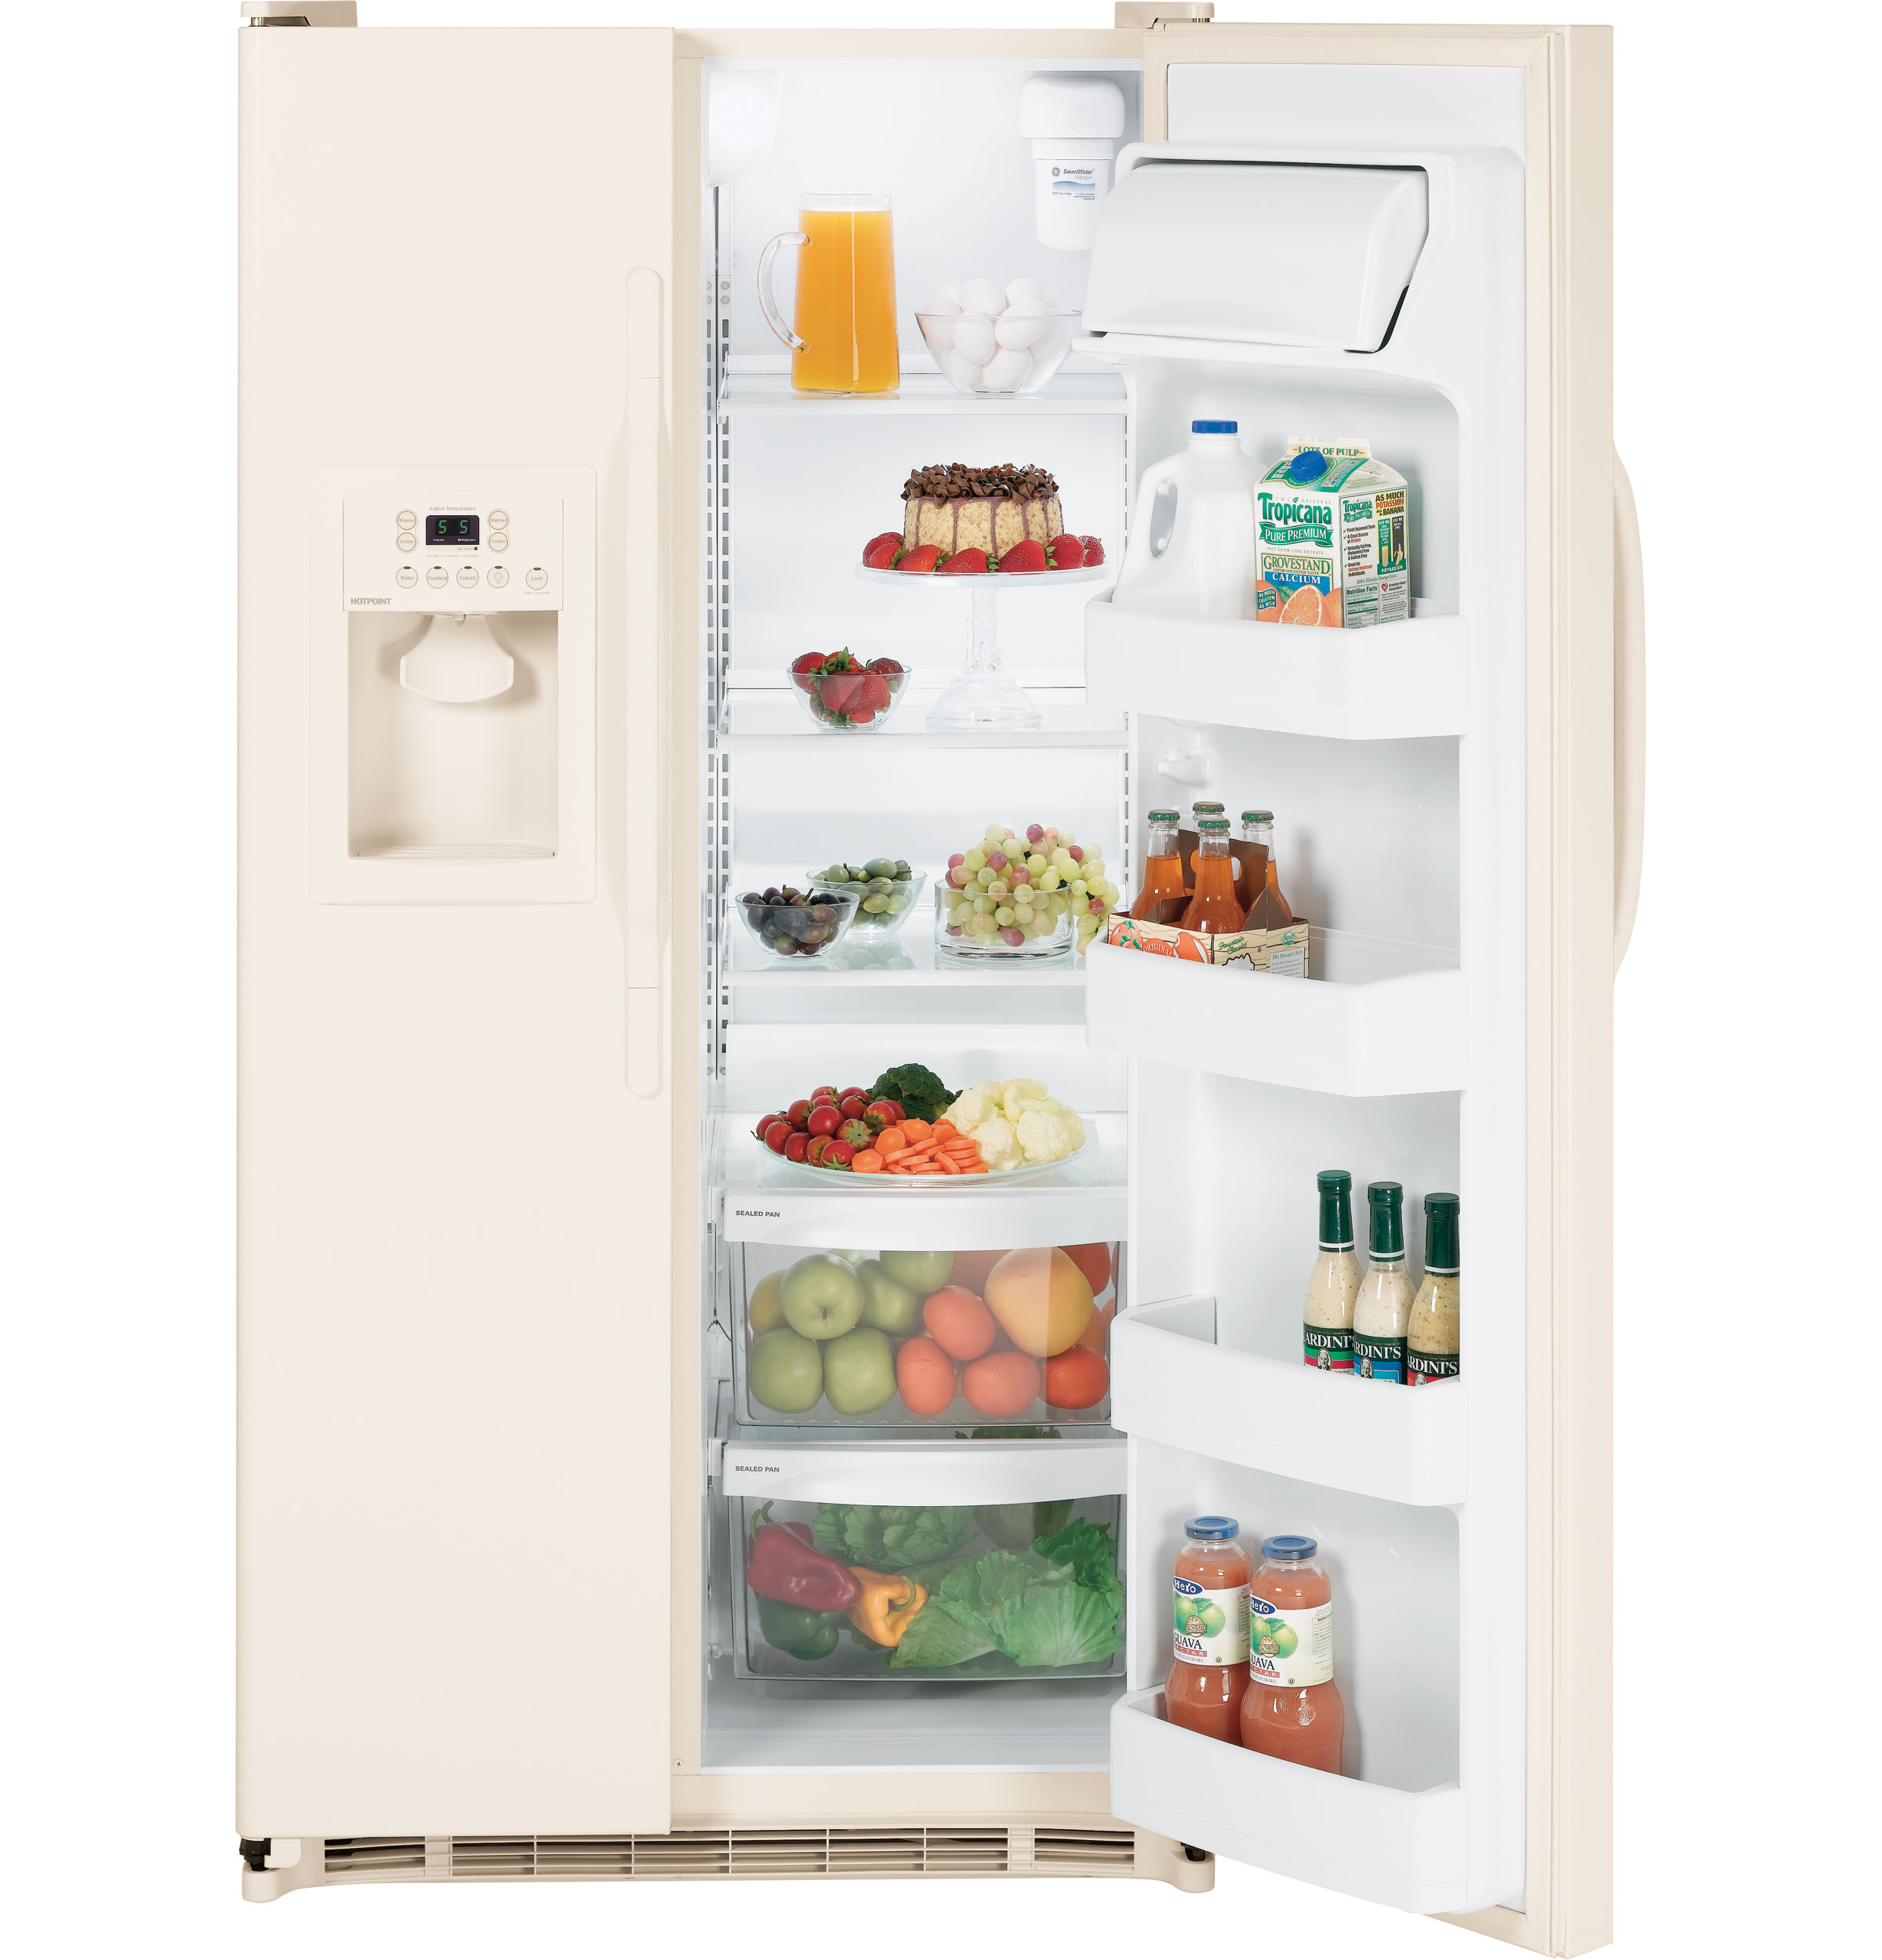 Hotpoint® 25.0 Cu. Ft. Side-By-Side Refrigerator with Dispenser